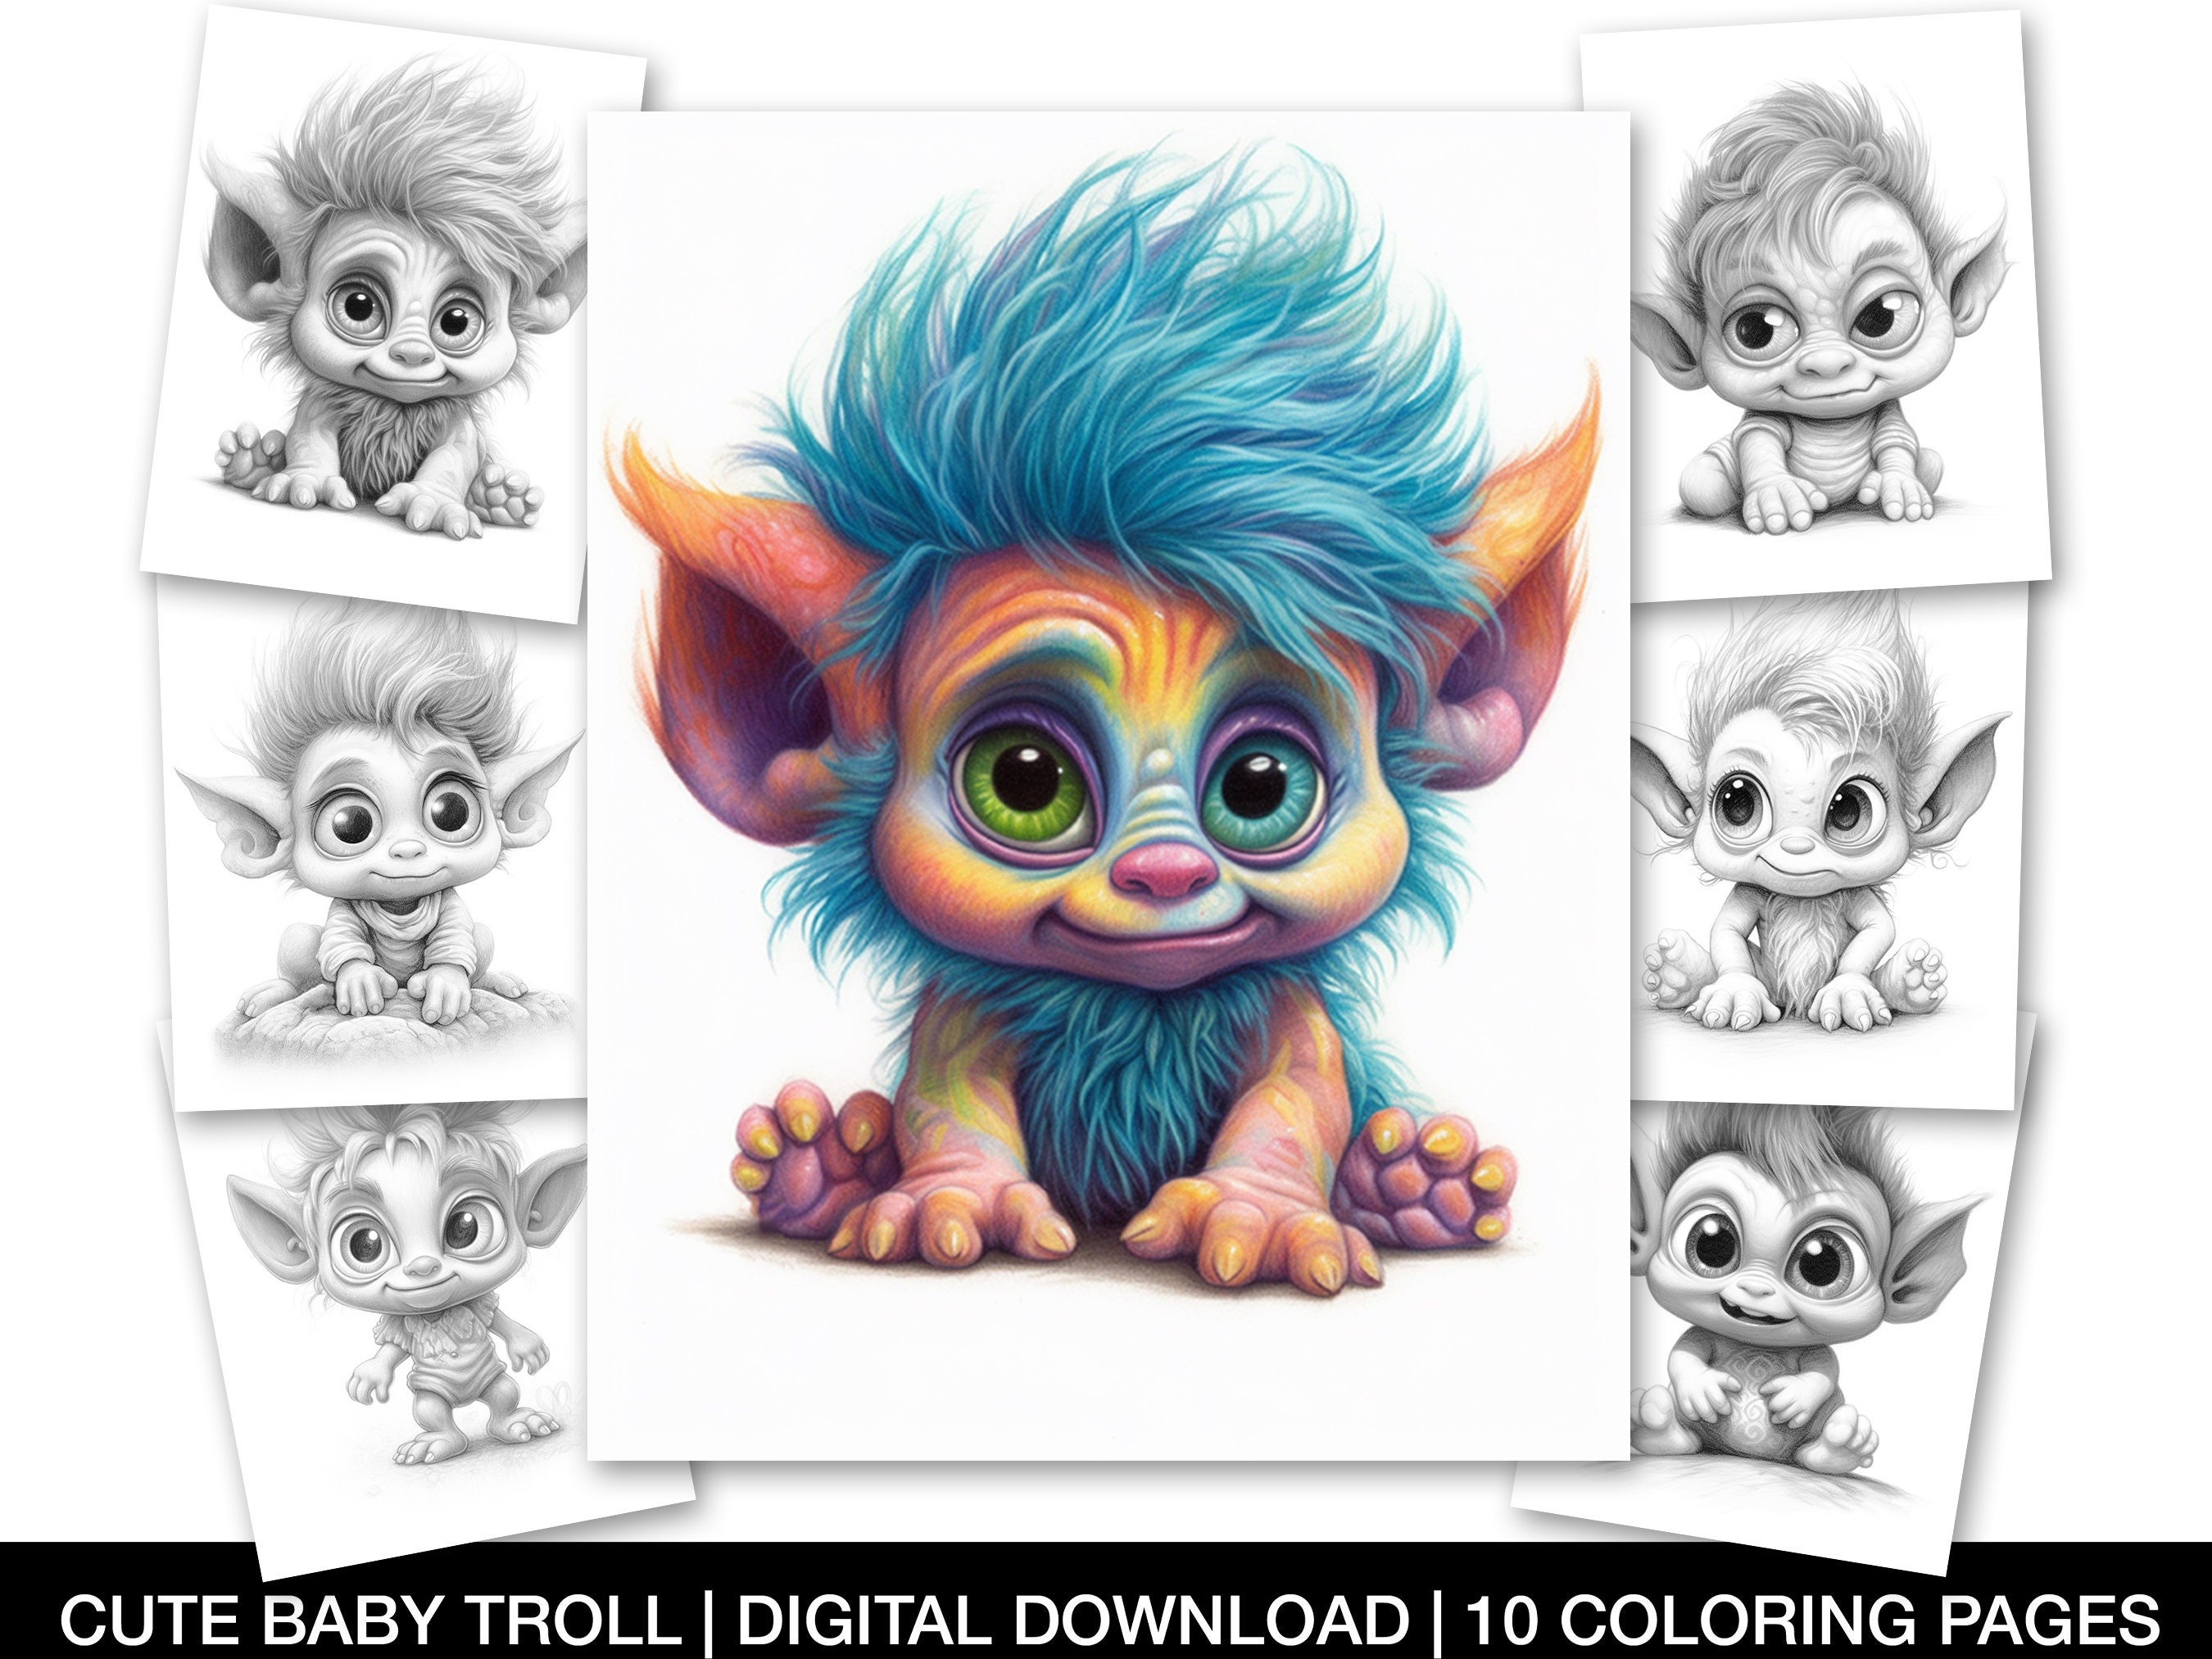 Cute troll baby digital coloring pages adults and kids colouring books instant download grayscale coloring page printable coloring book